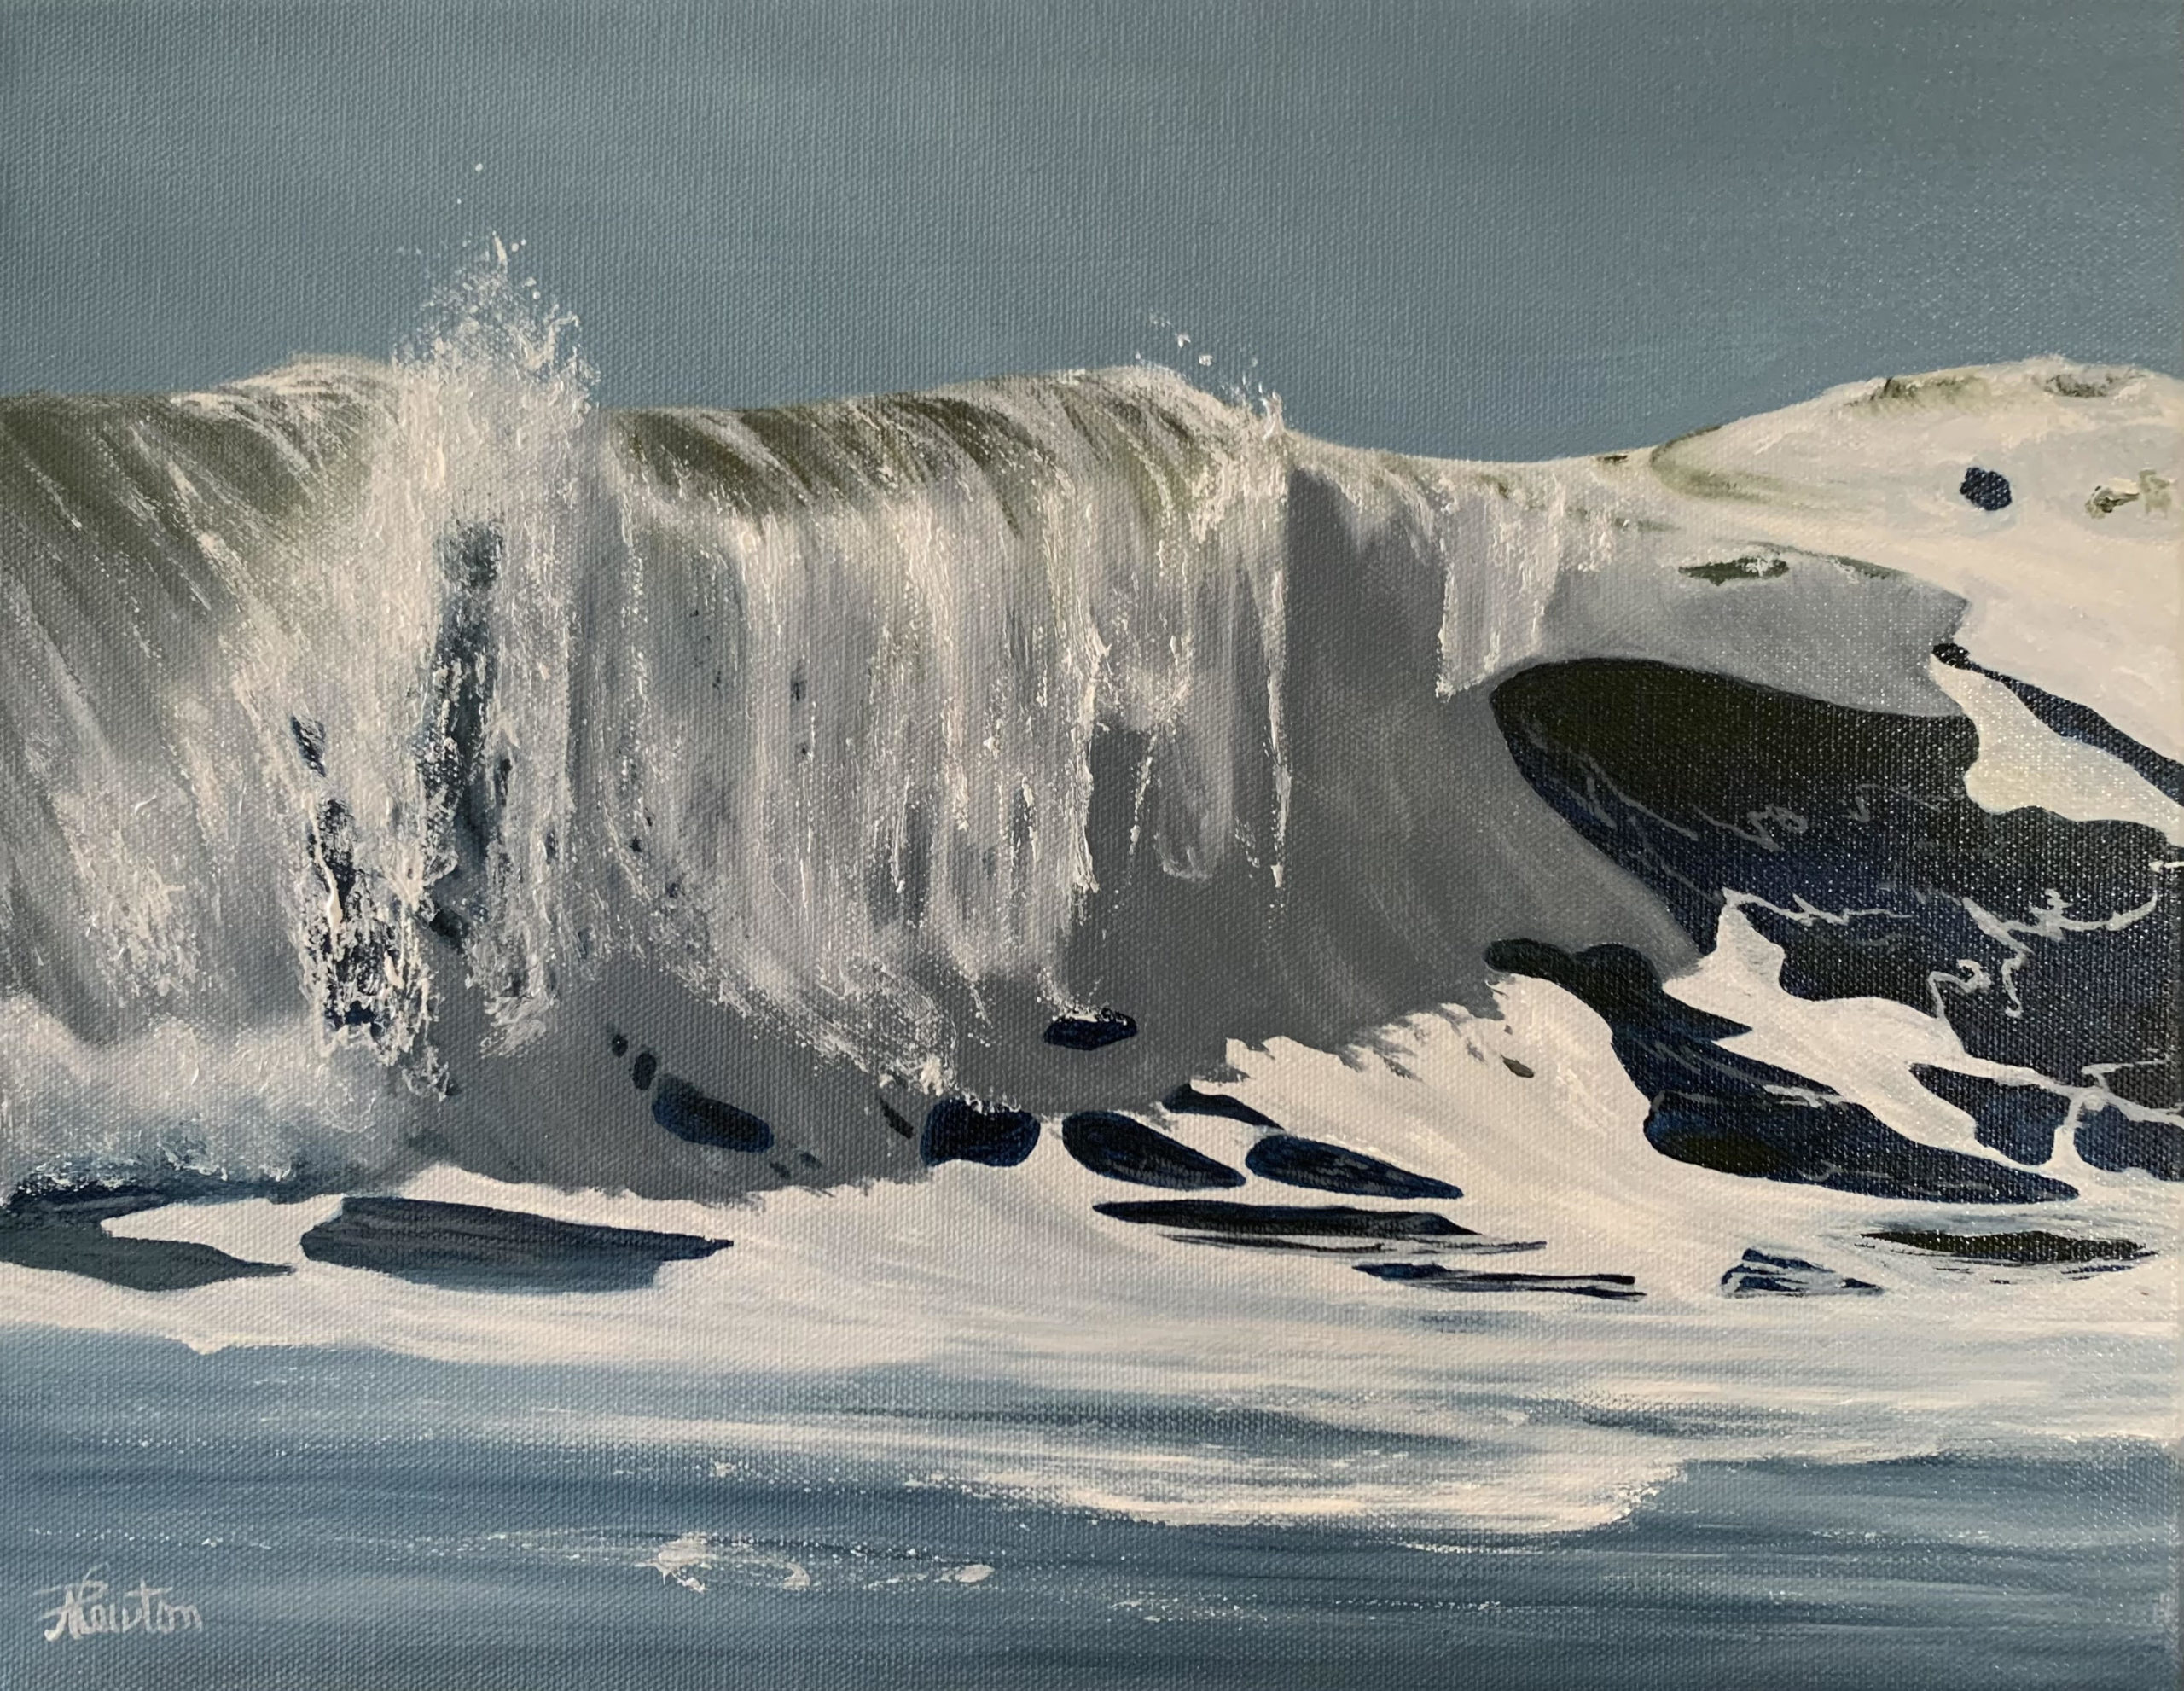 Central Coast Breakers, 11x14, Oil on Canvas $800.